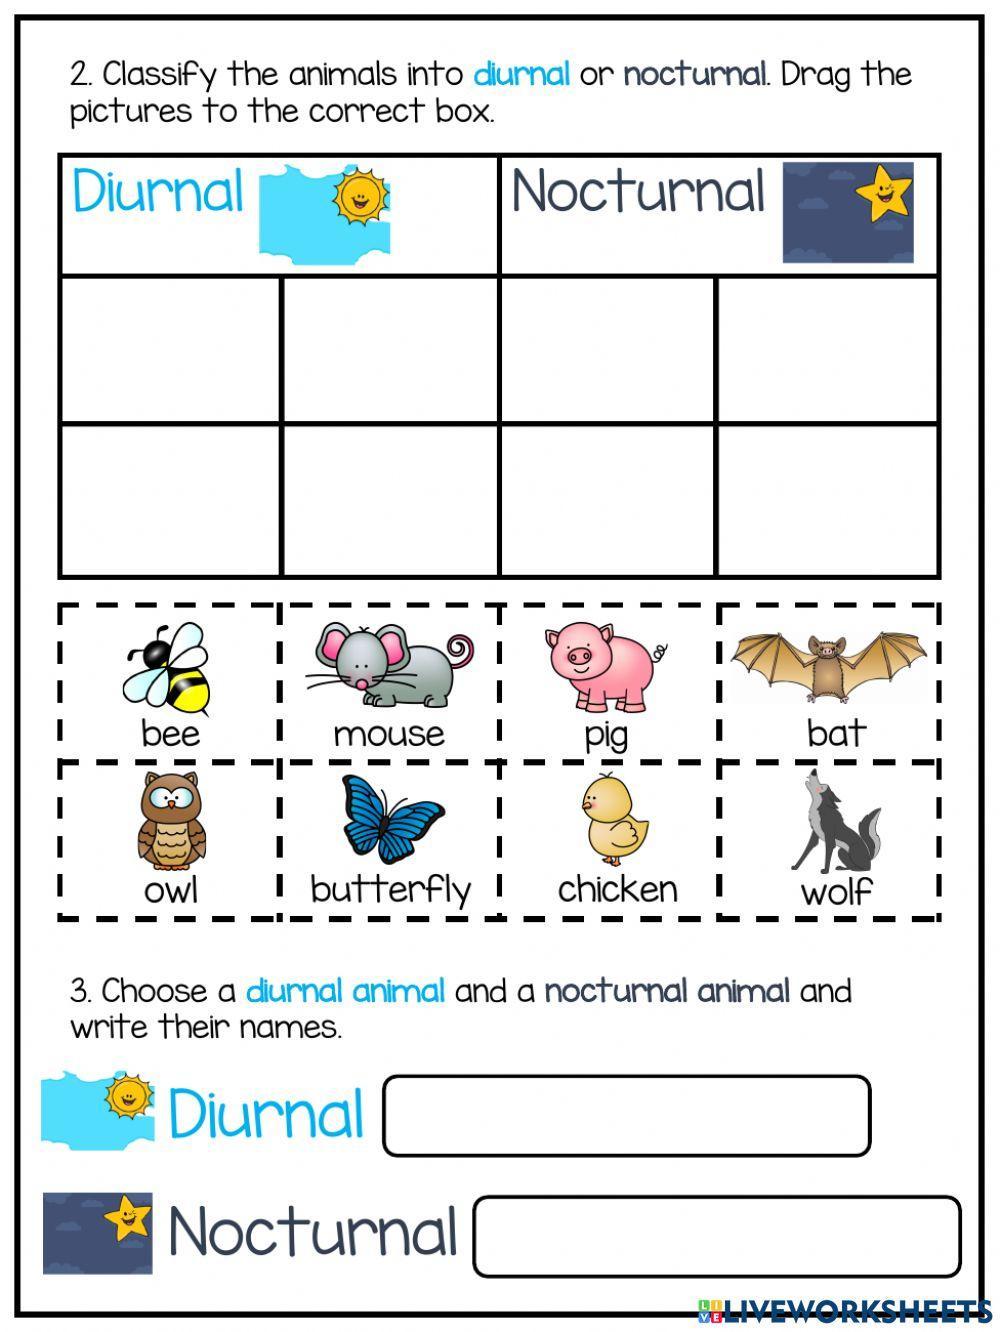 Day and Night: Diurnal and Nocturnal animals